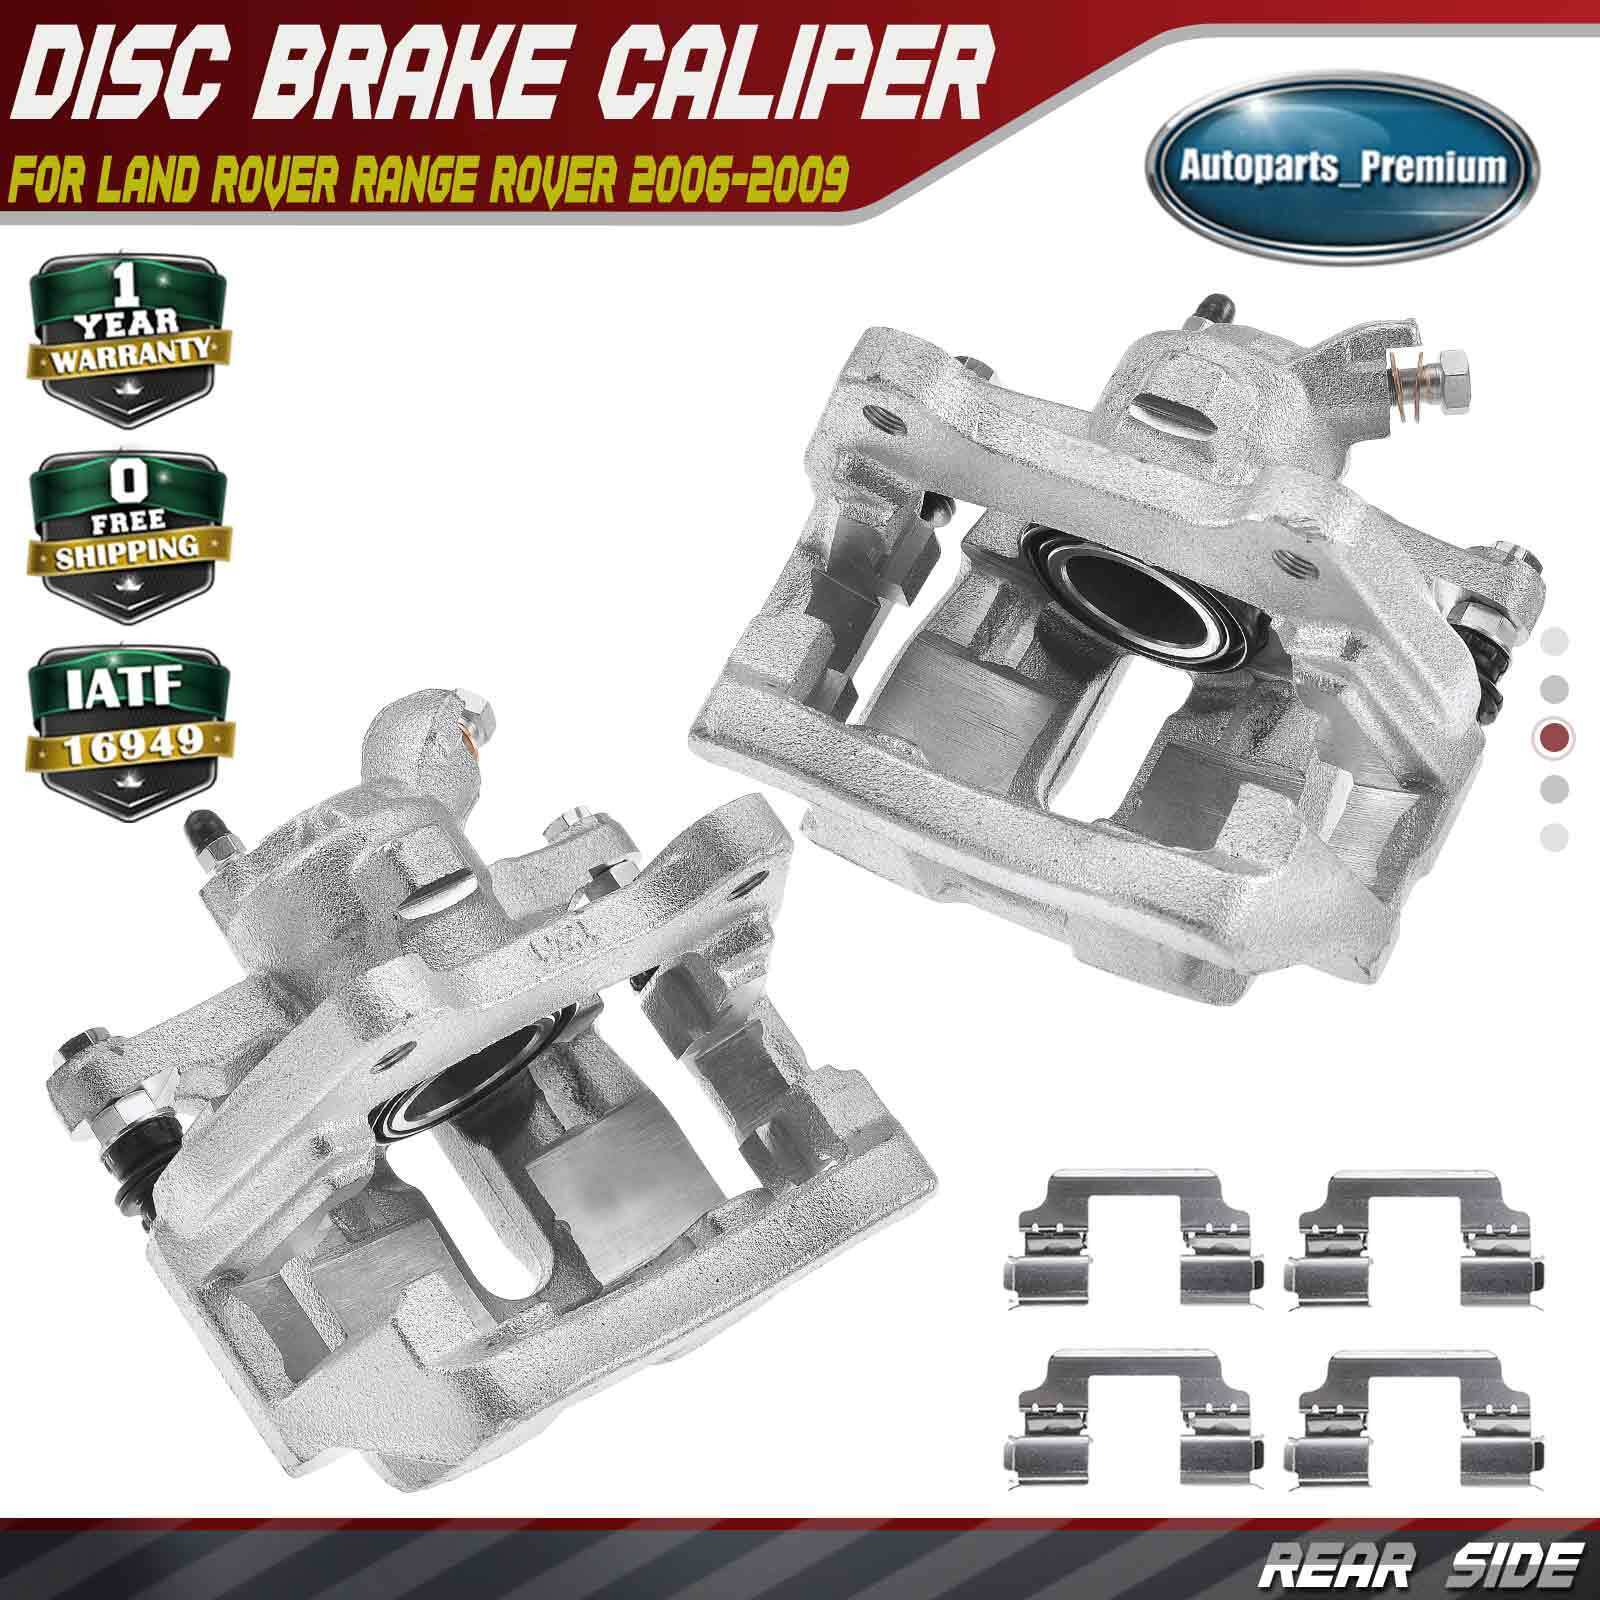 2x Rear L & R Brake Caliper with Bracket for Land Rover Range Rover 2006-2009